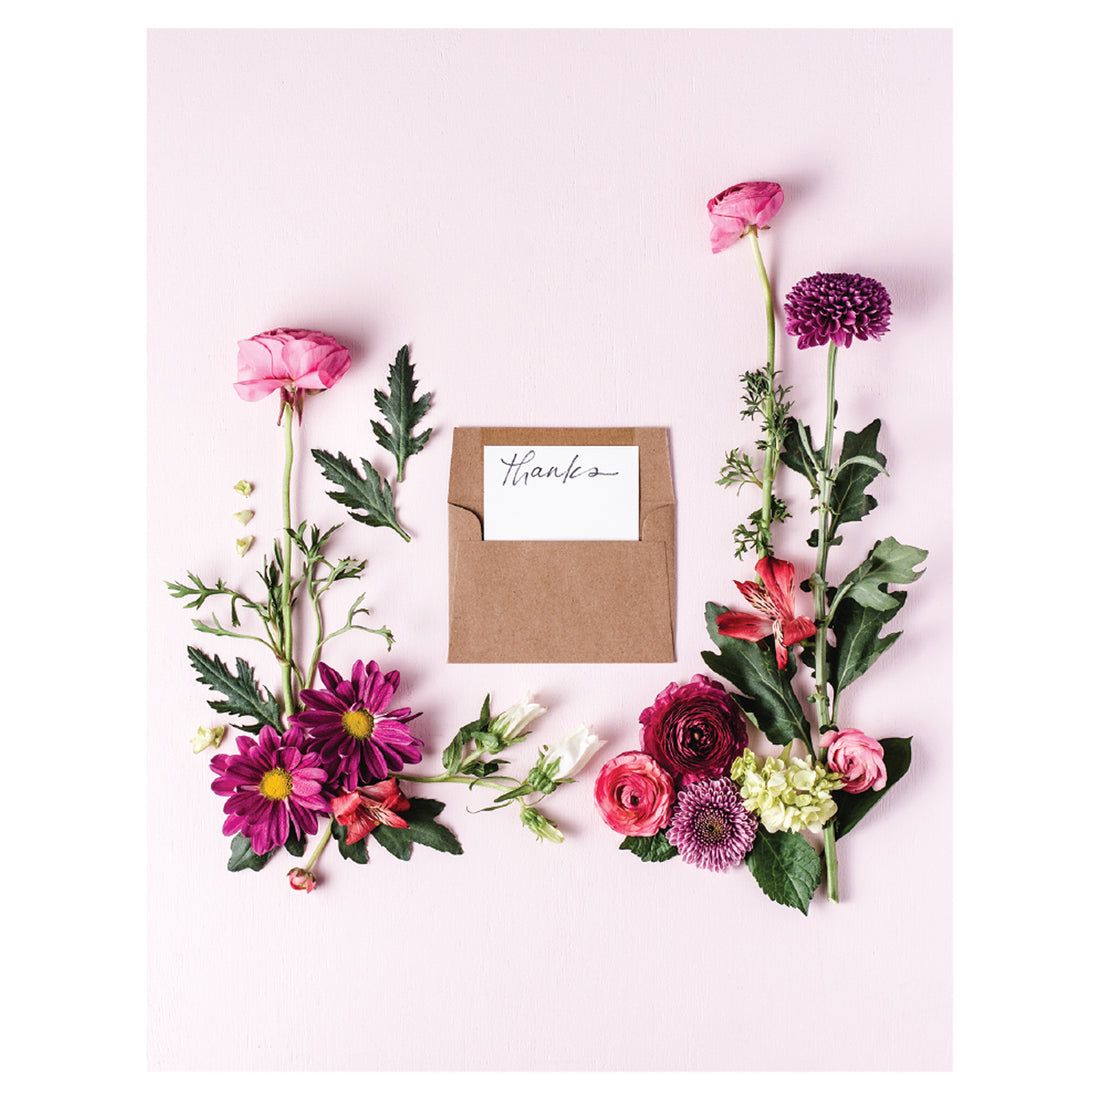 Design a Springtime Thanks Card with flowers on a pink background, featuring a blank interior for personalized messages by Hester &amp; Cook.